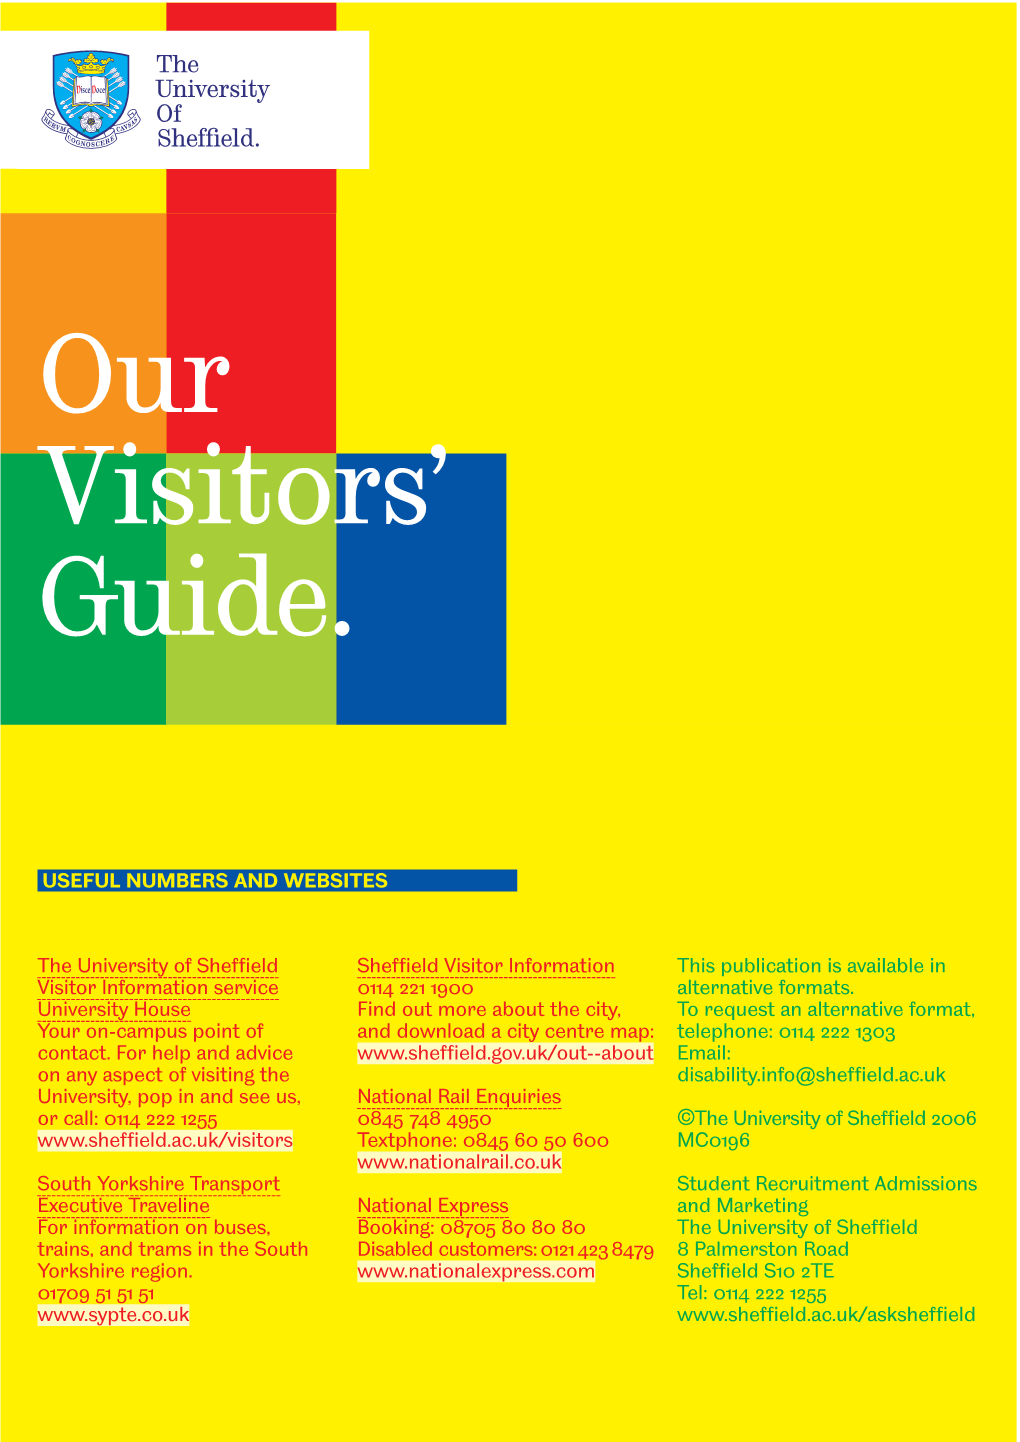 Our Visitors' Guide